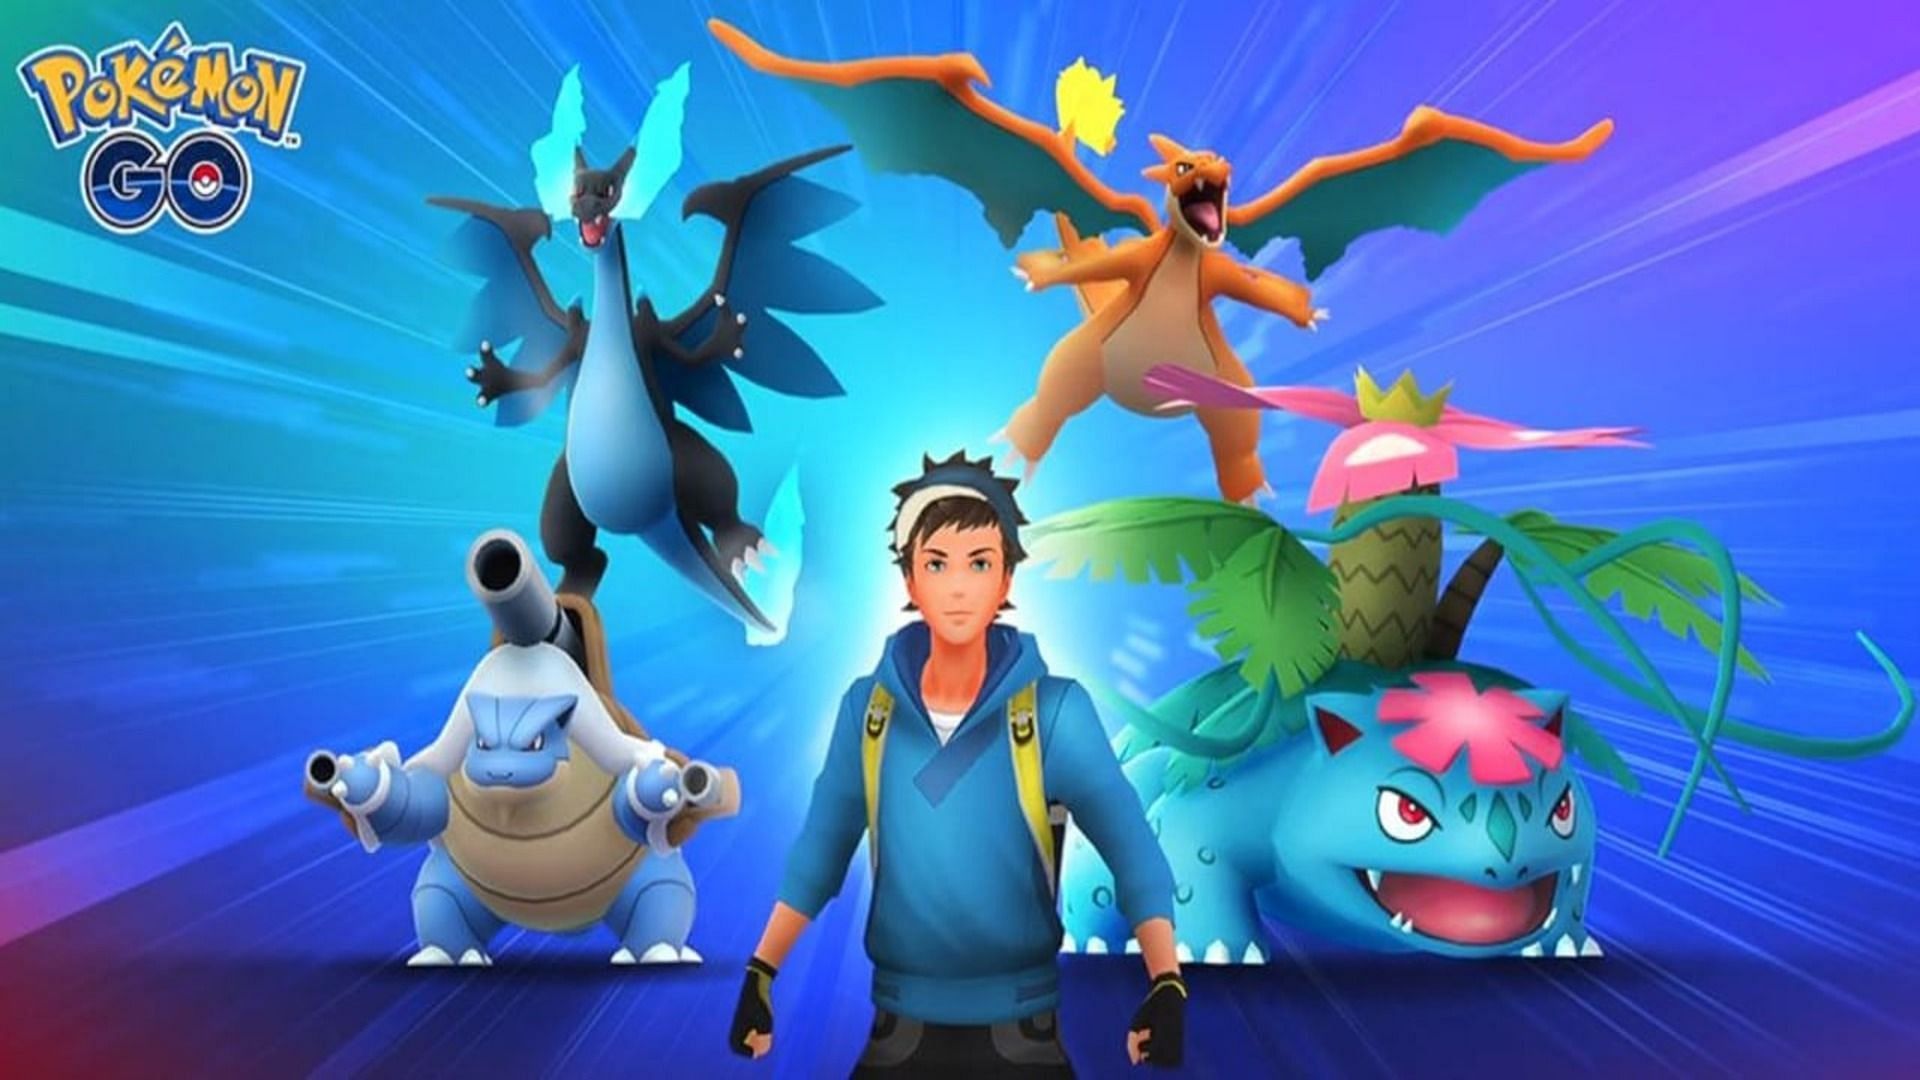 The official imagery for the recent Mega Evolution event for Pokemon GO (Image via Niantic)